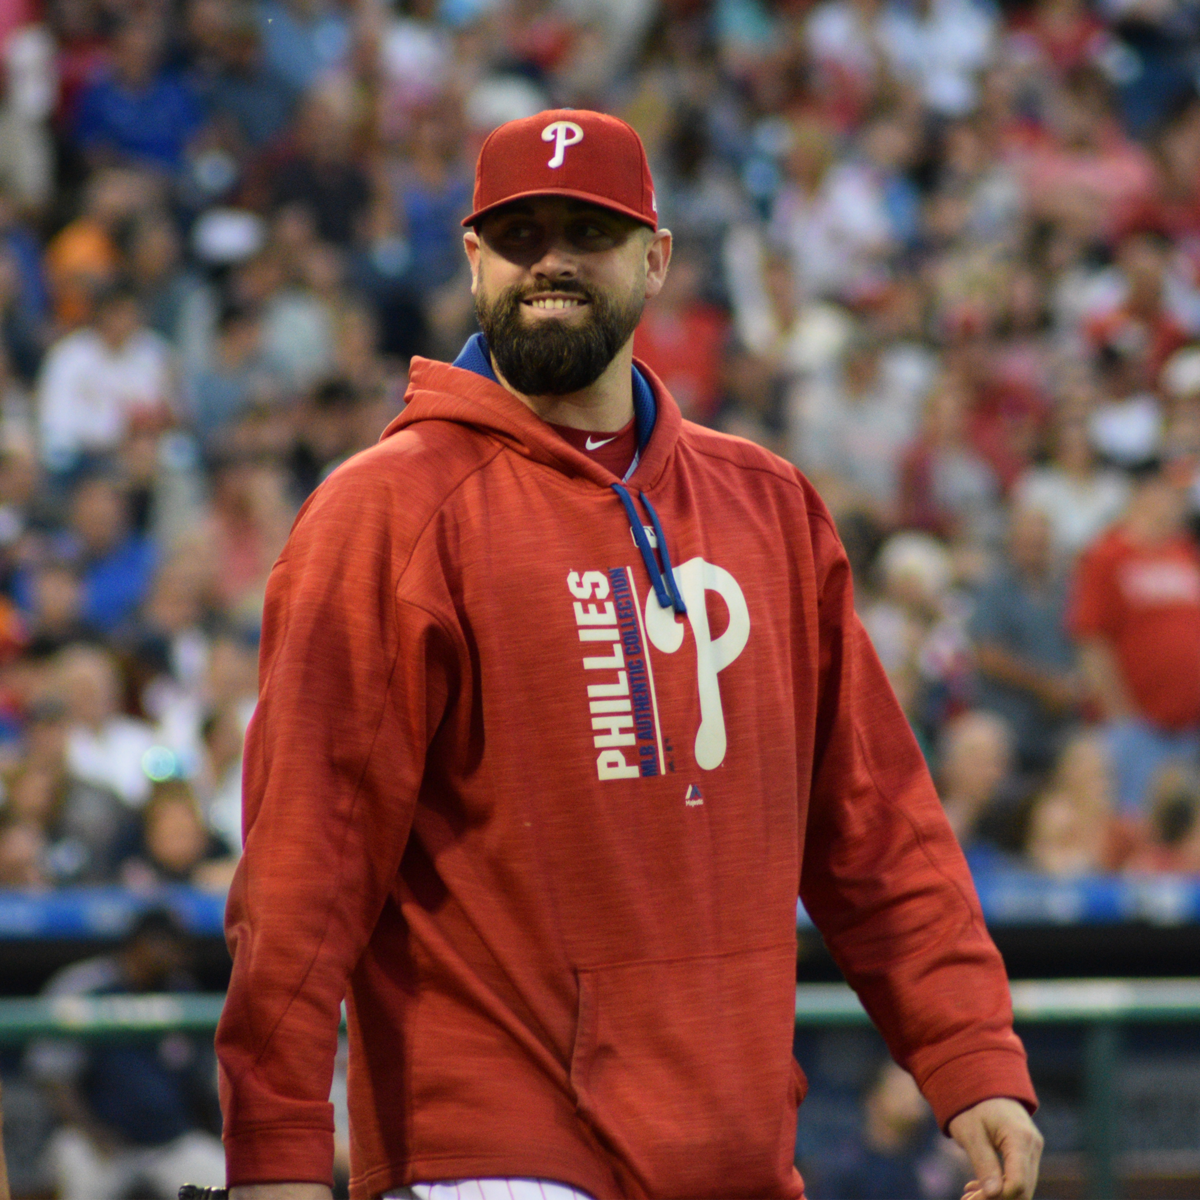 Major league pitcher Pat Neshek started collecting as a kid, and